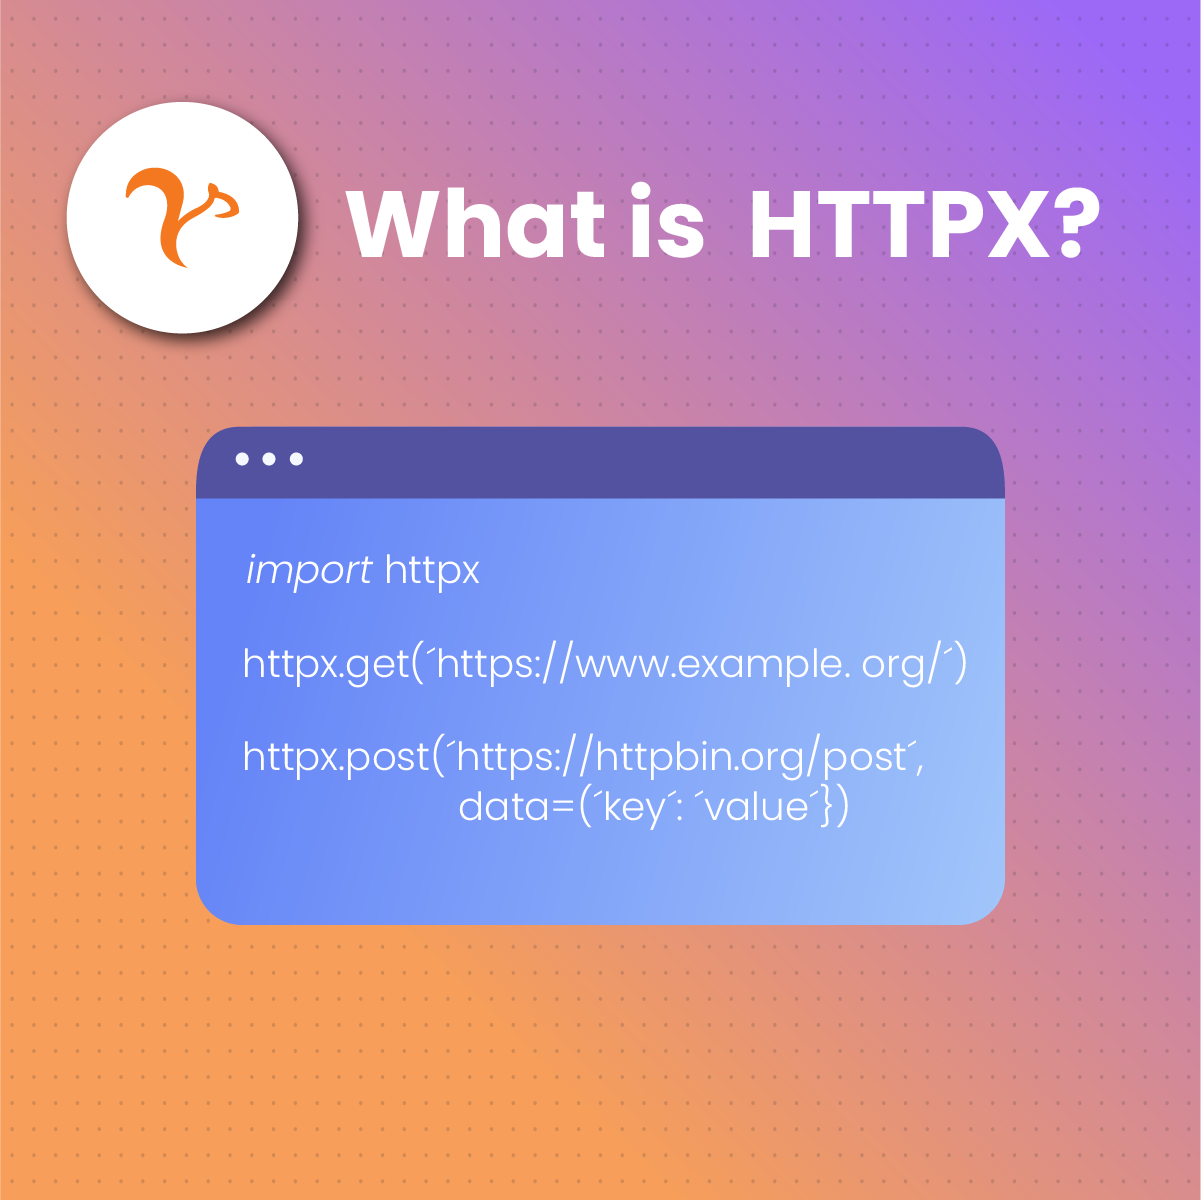 What is HTTPX